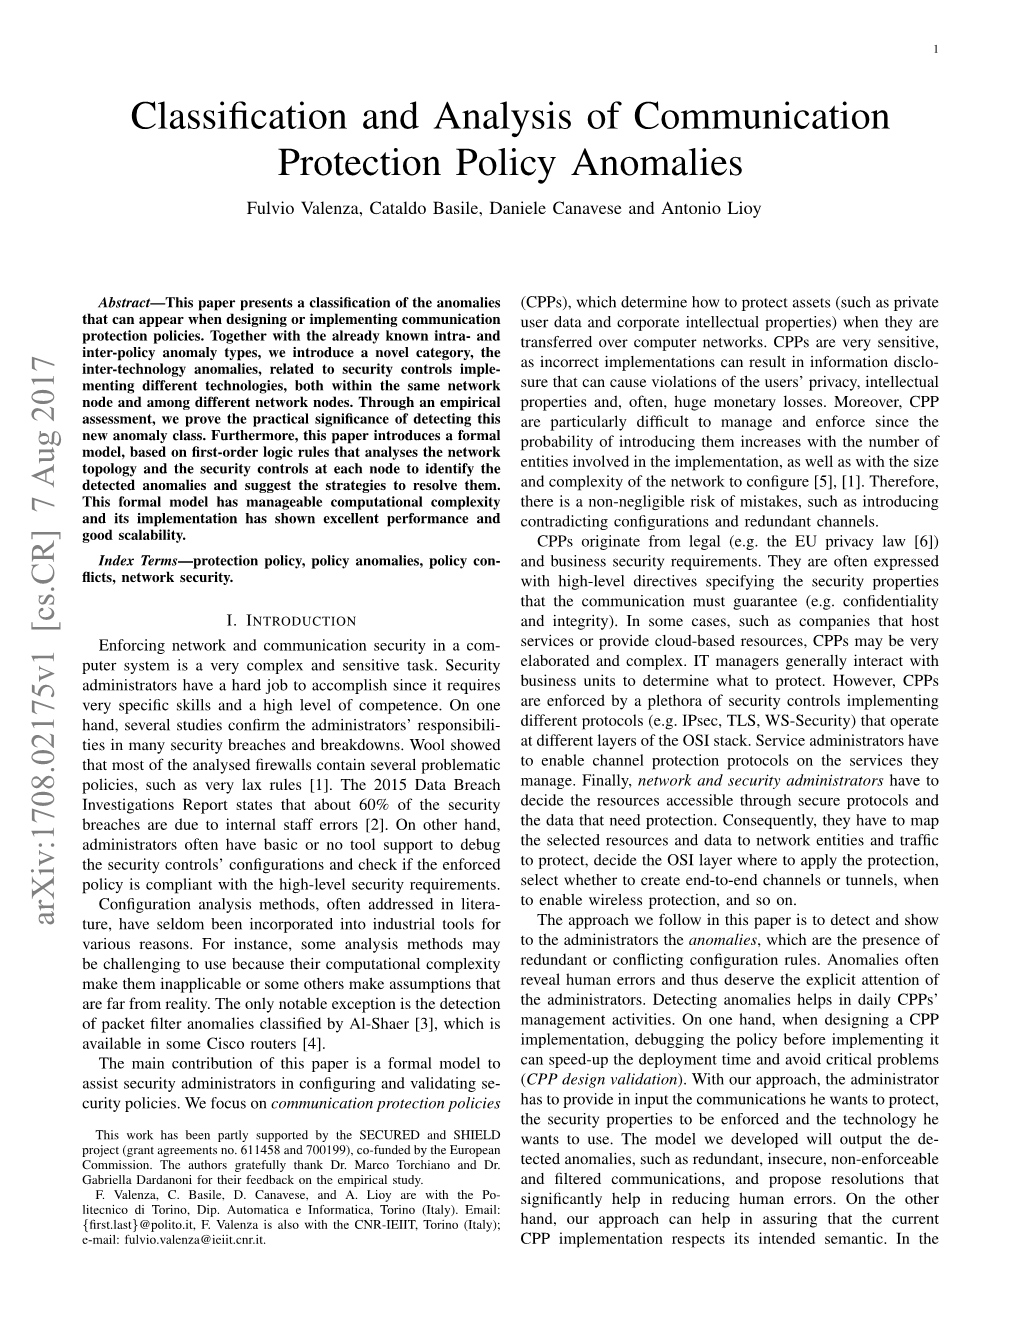 Classification and Analysis of Communication Protection Policy